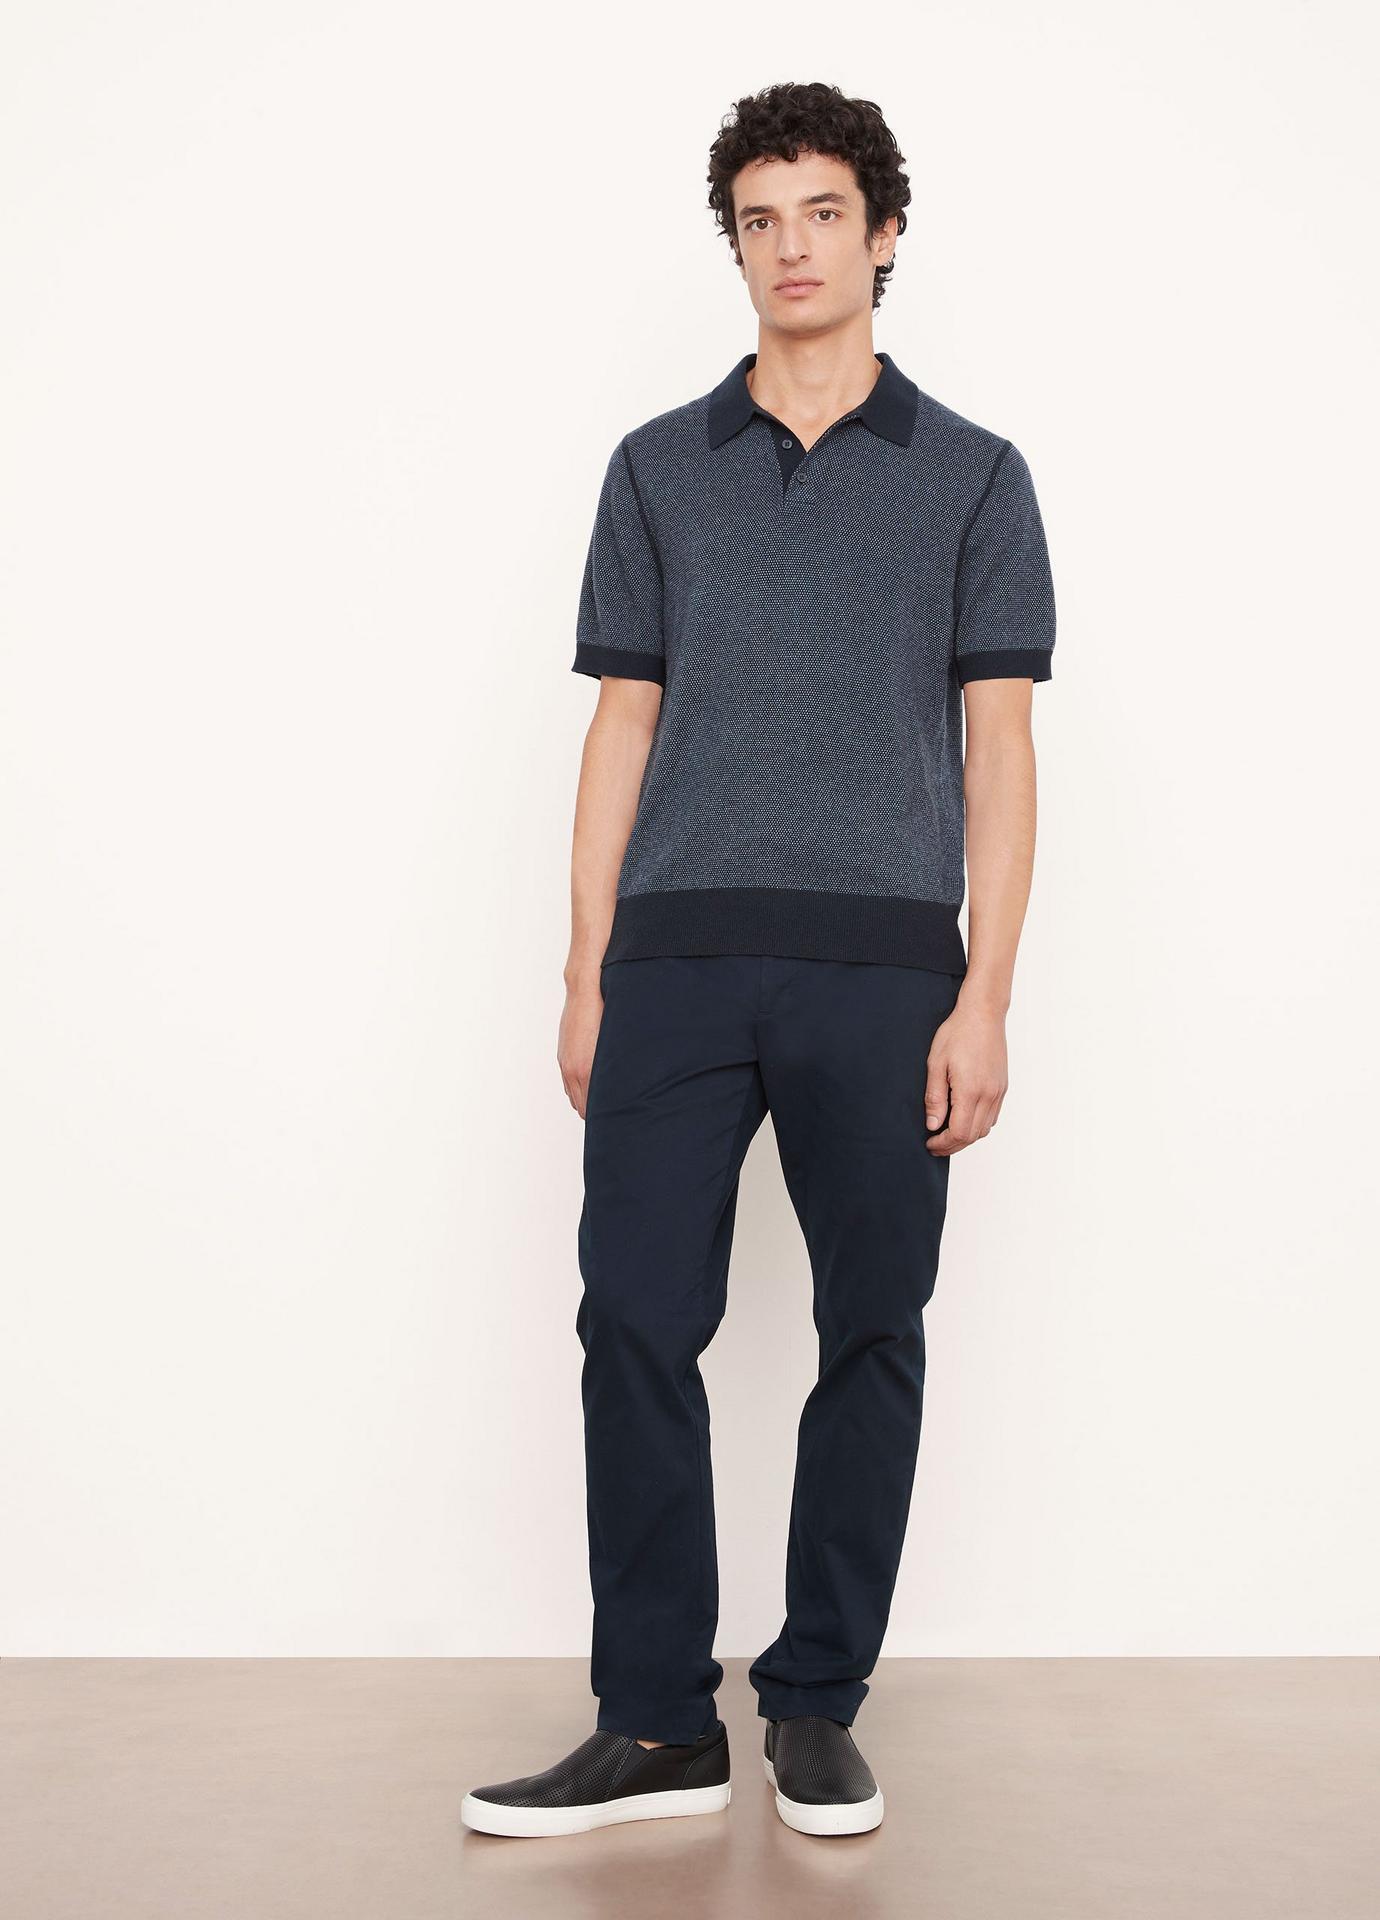 Vince Wool and Cashmere Birdseye Polo